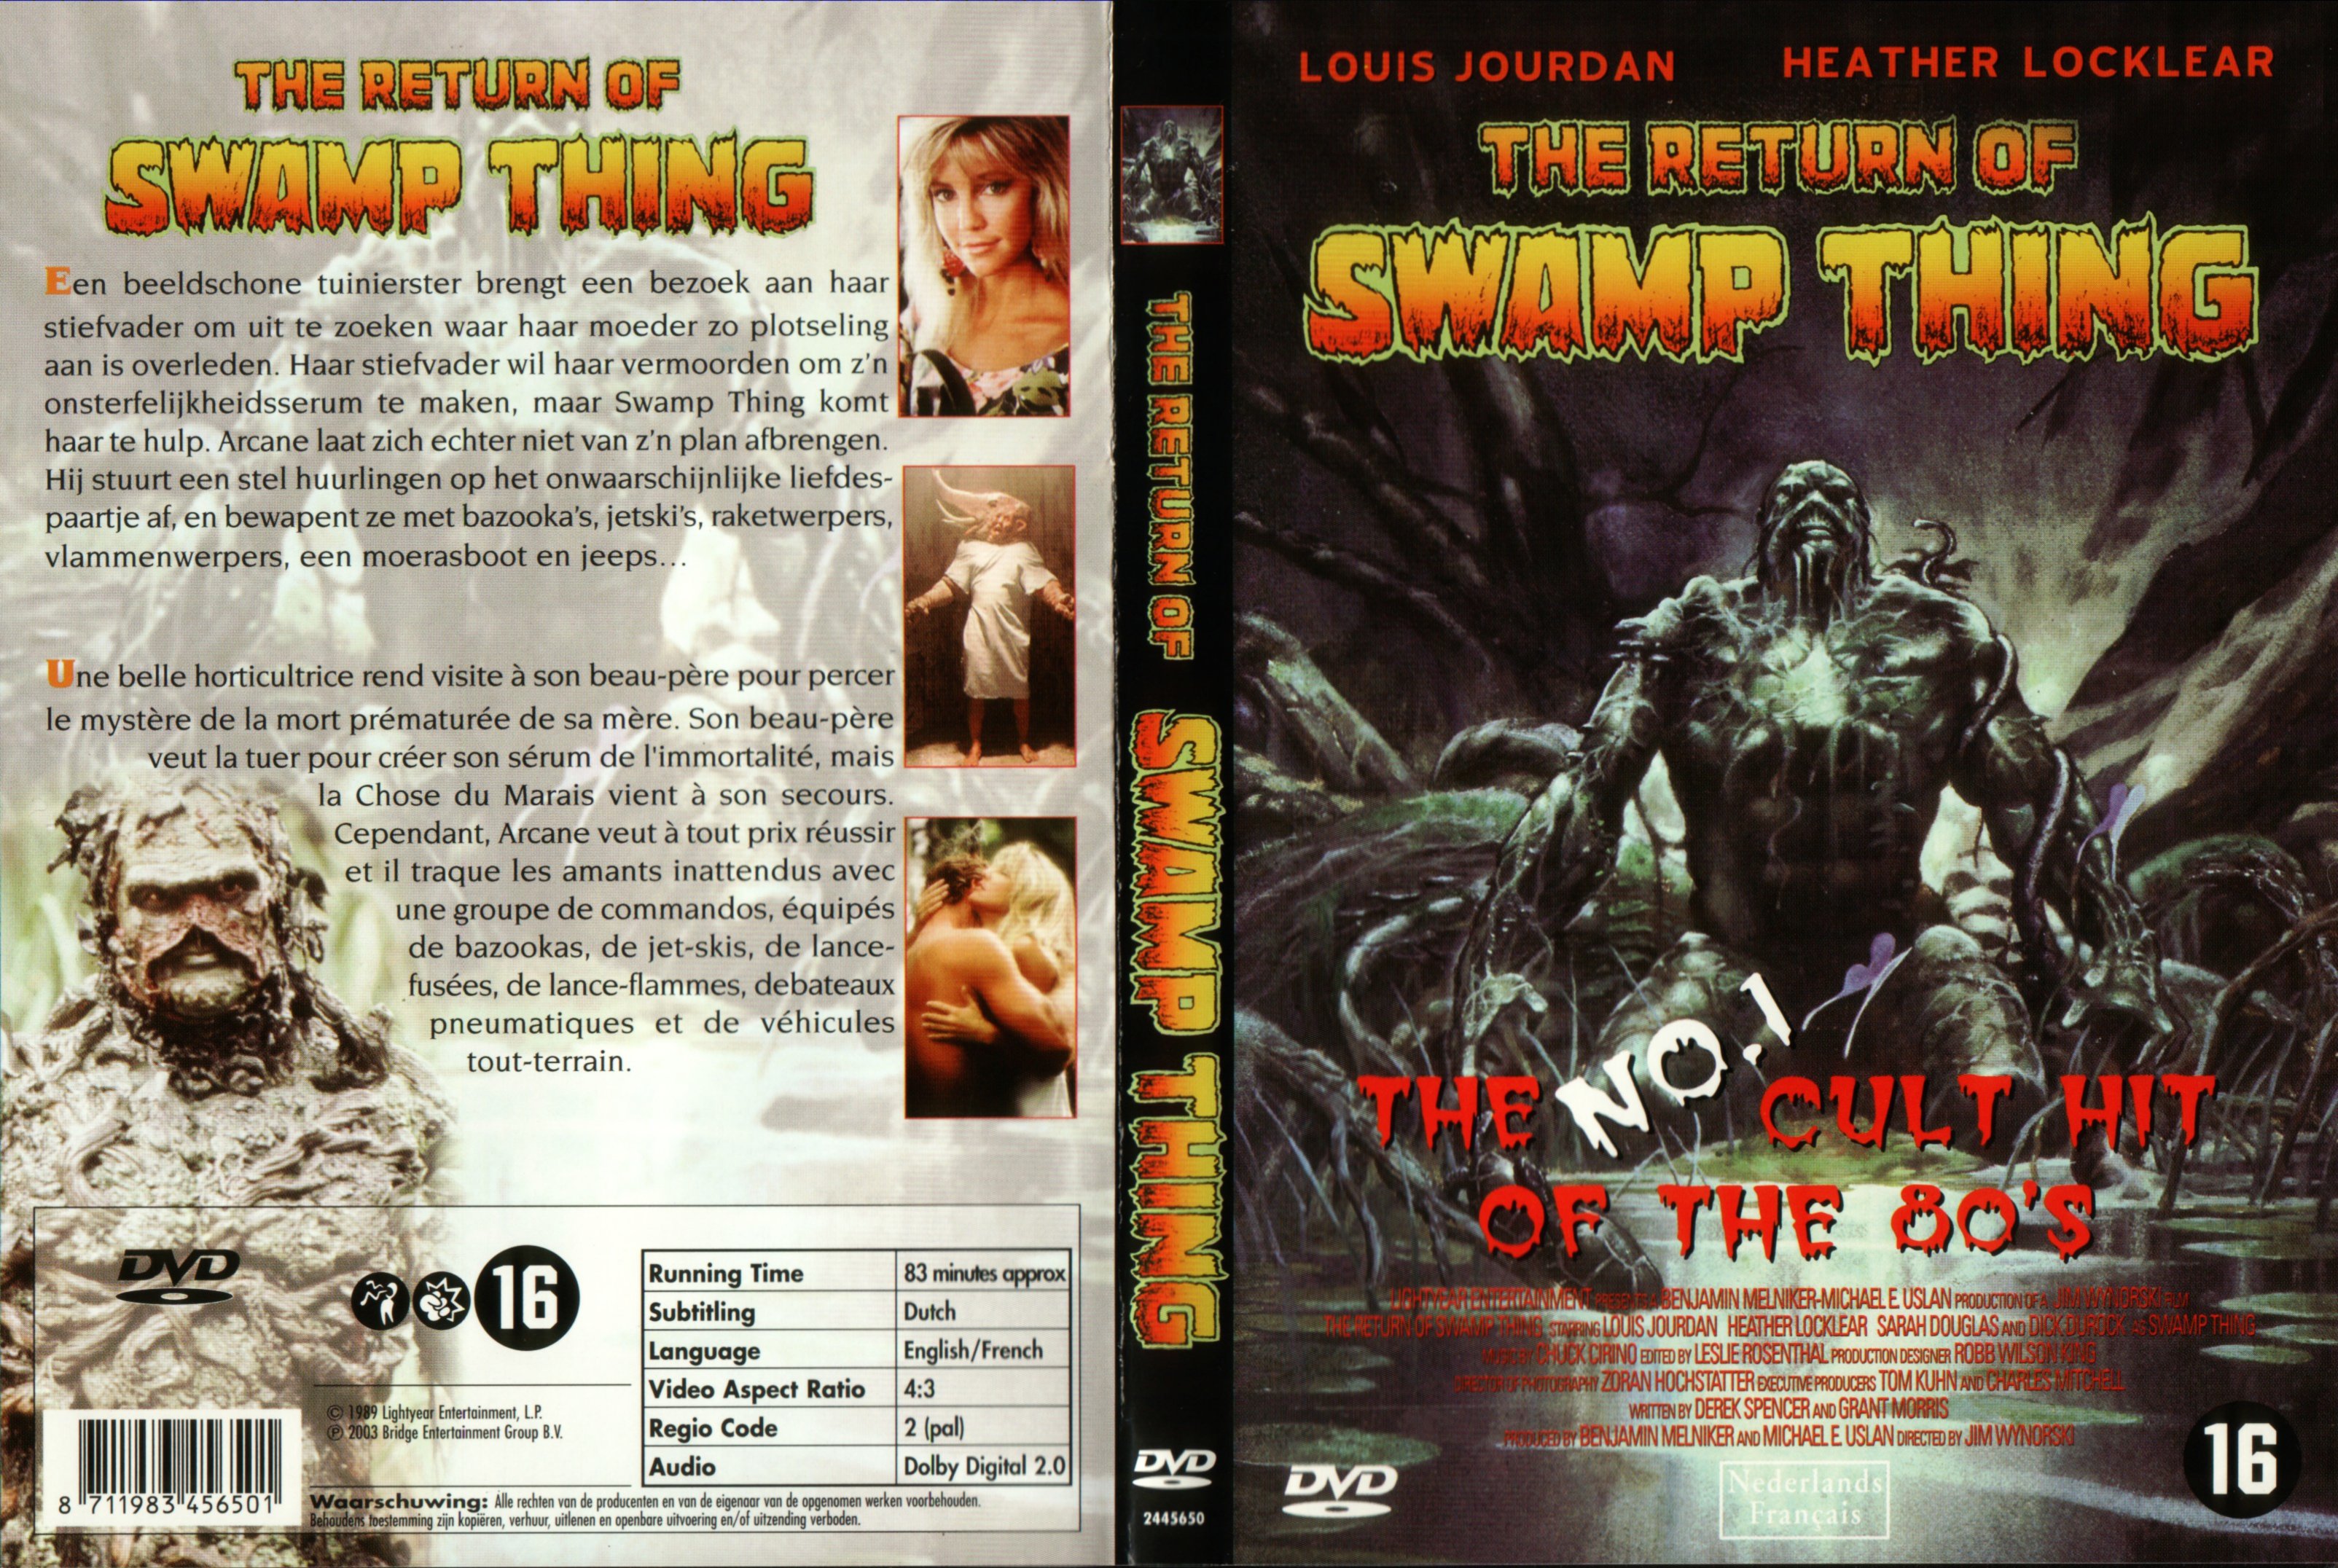 Jaquette DVD The return of swamp thing